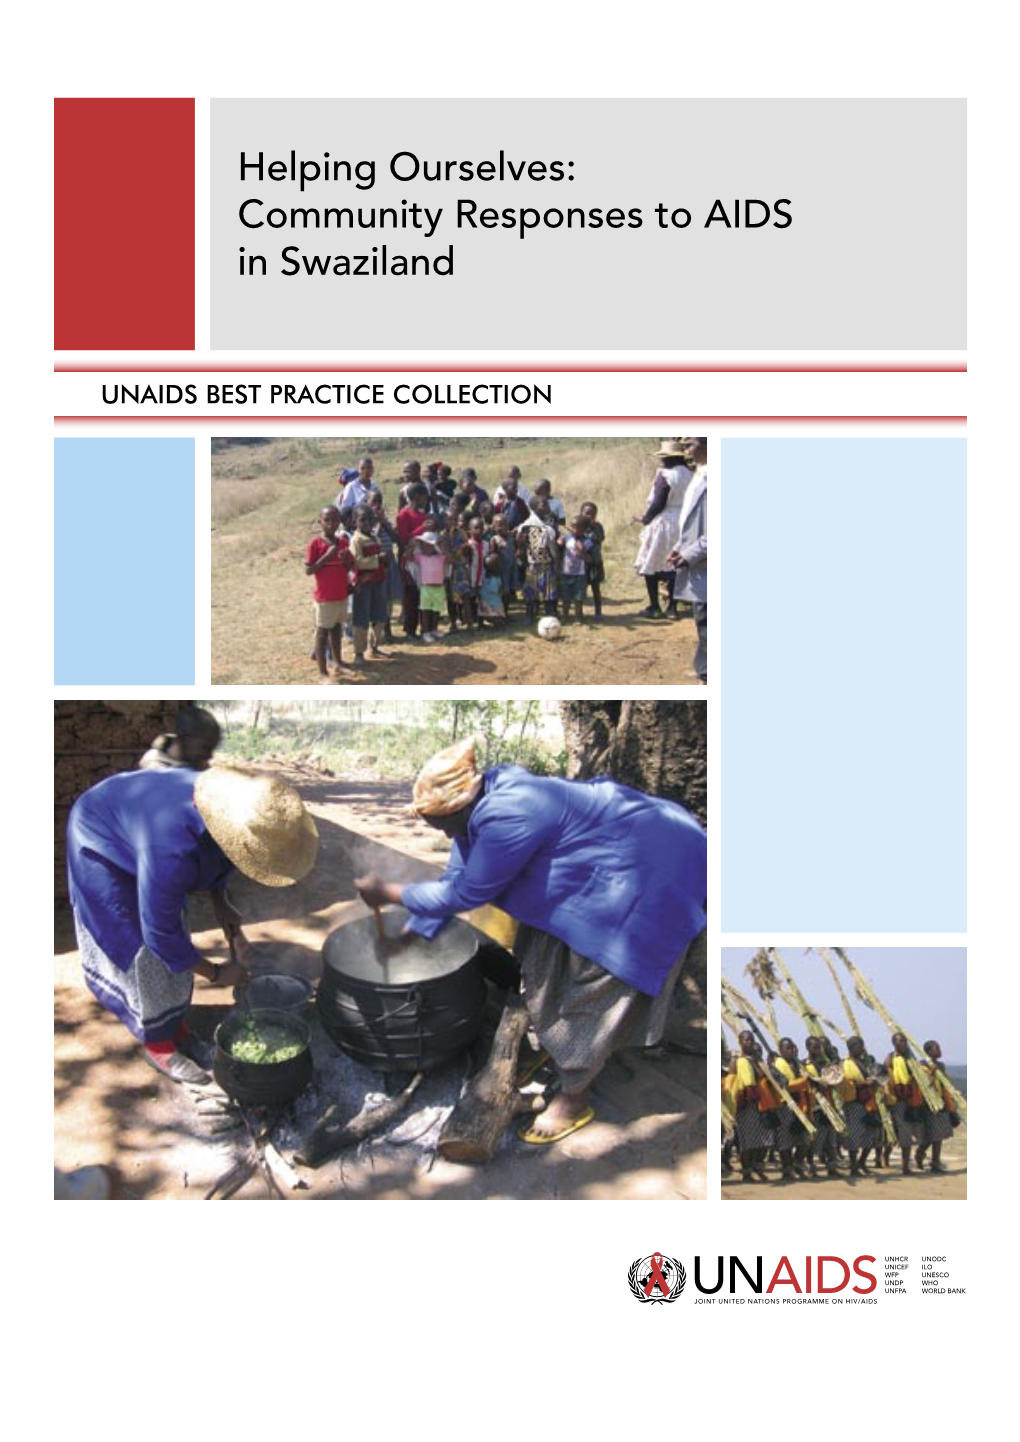 Helping Ourselves: Community Responses to AIDS in Swaziland